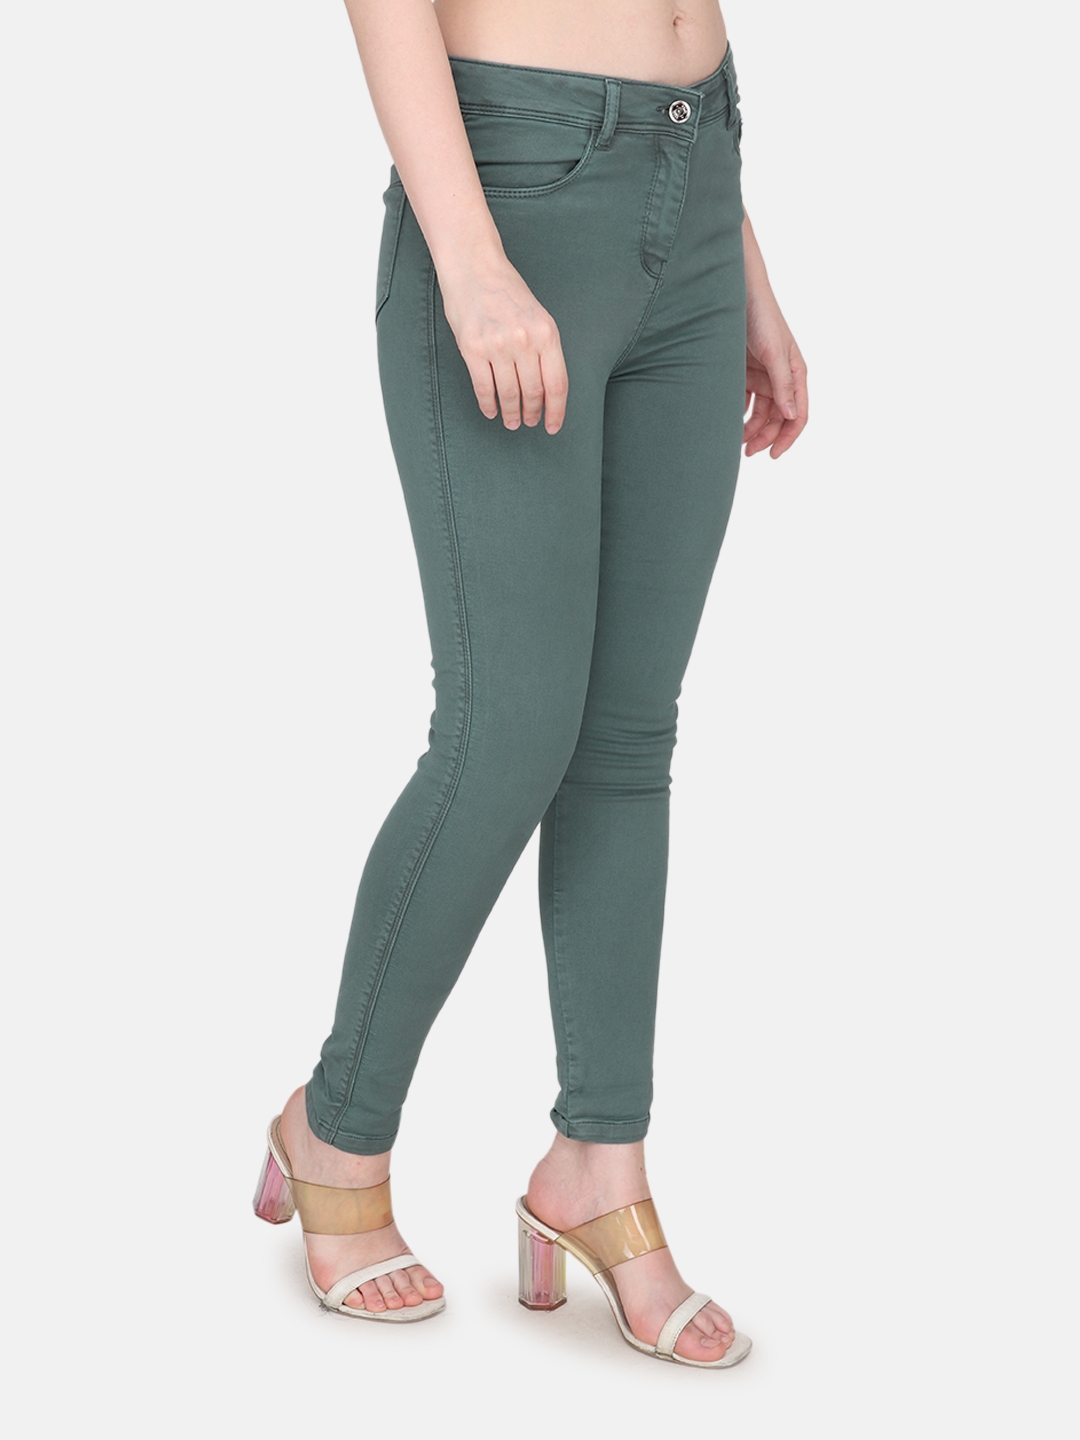 Albion | Albion By CnM Women Green Denim Stretchable Jeans 2